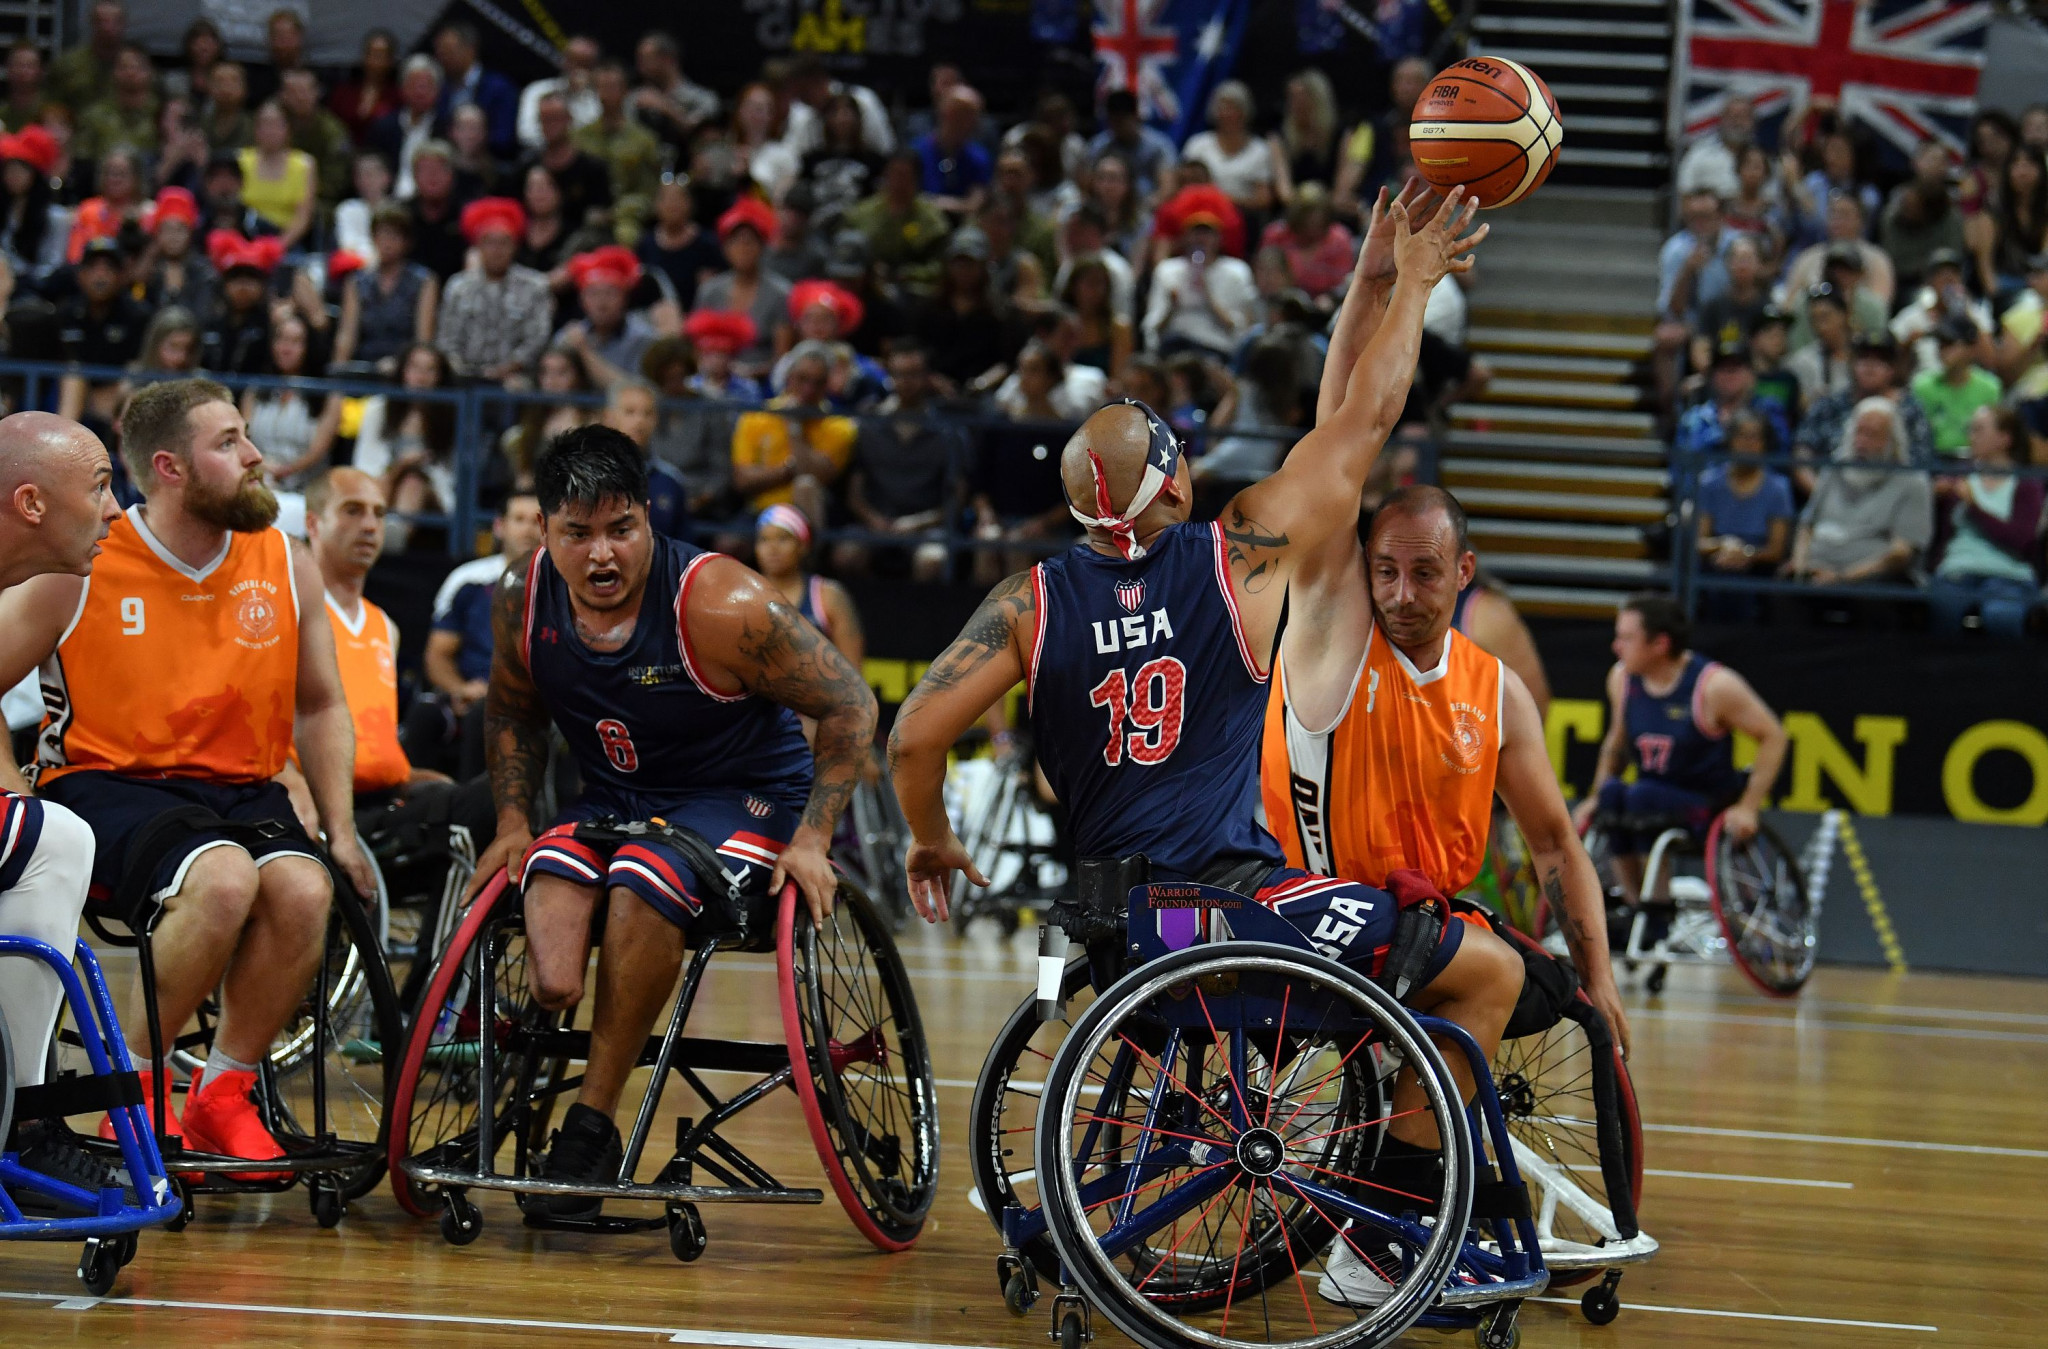 The United States beat The Netherlands in the final of the wheelchair basketball, the final event of the 2018 Sydney Invictus Games ©Getty Images